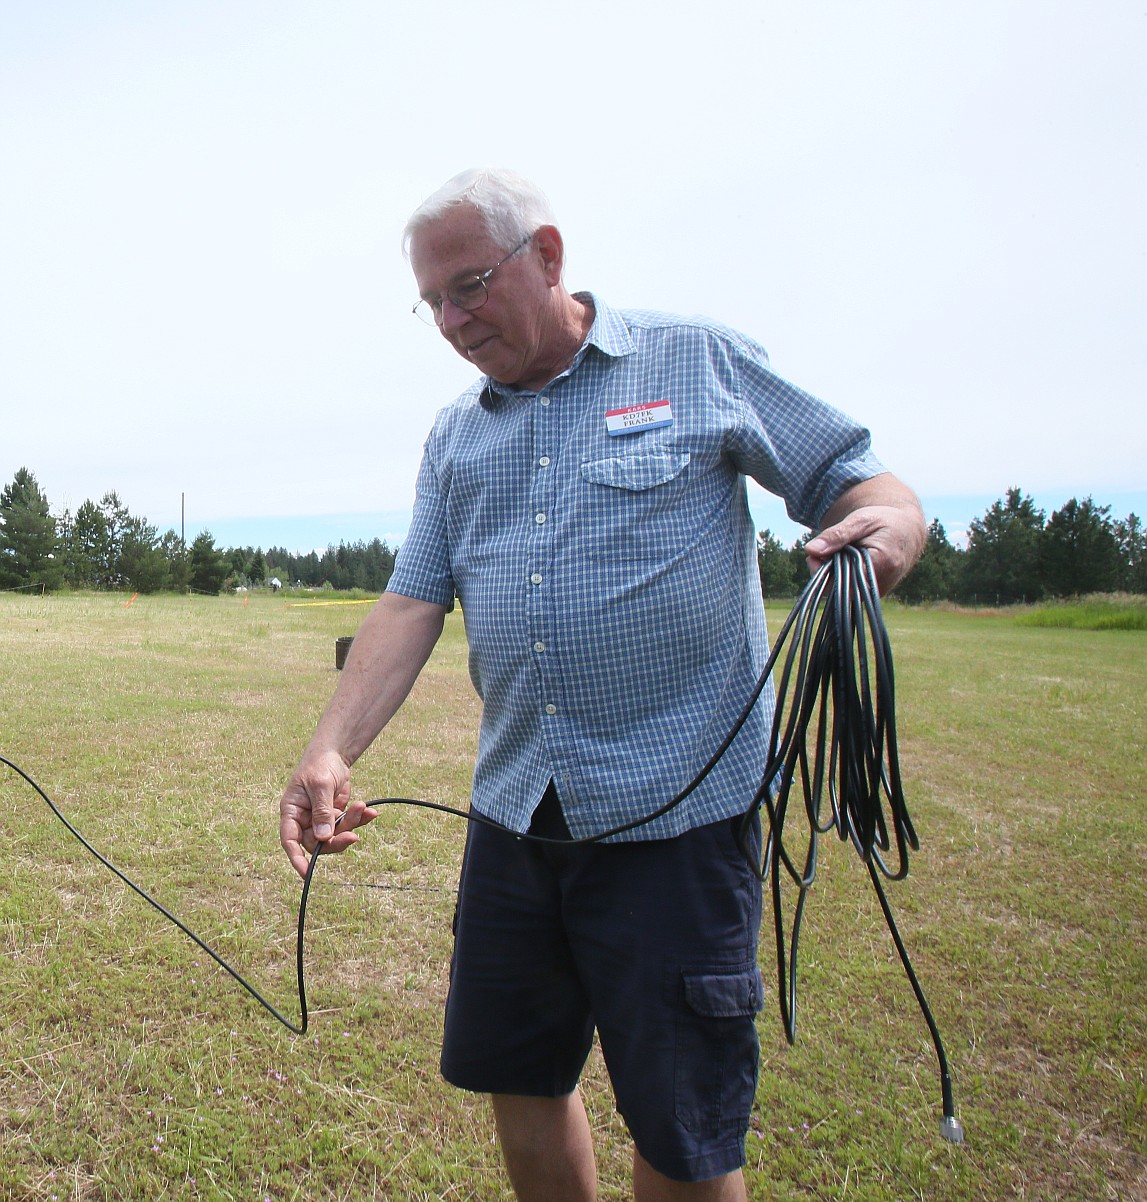 Kootenai Amateur Radio Society member Frank Krug unravels cables on Friday while setting up for Amateur Radio Field Day.